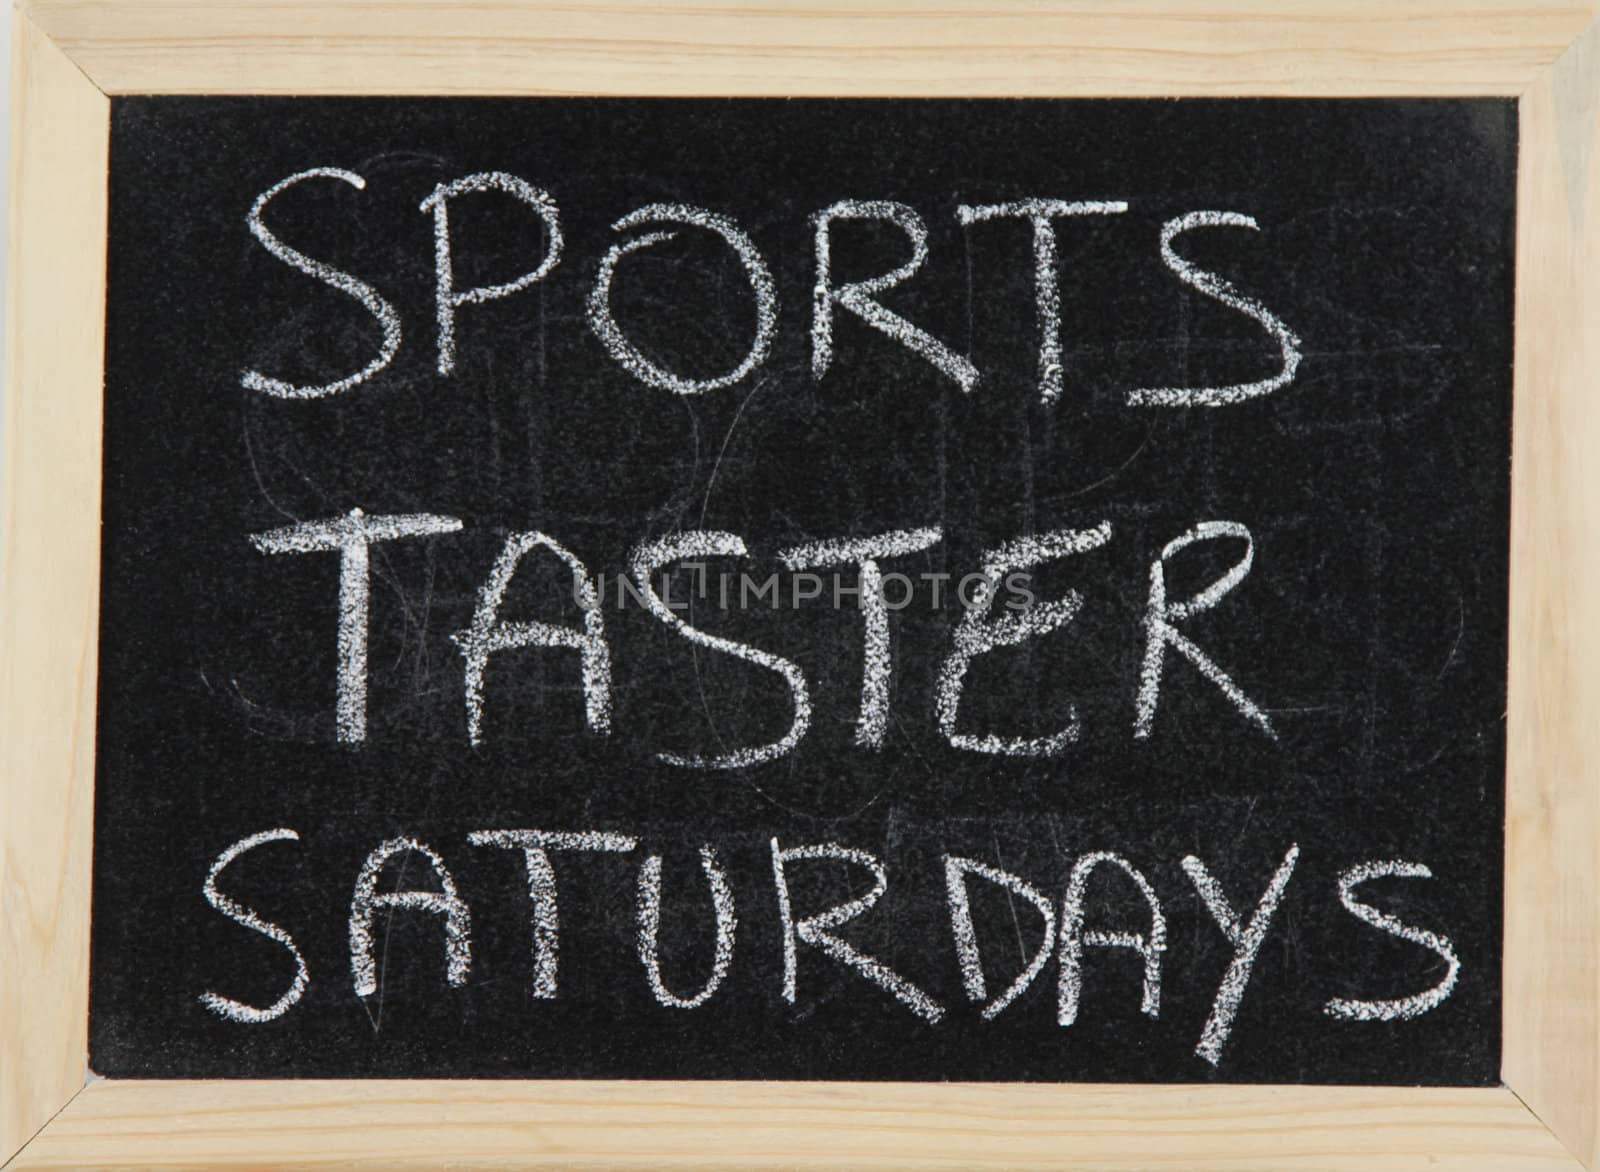 A blackboard with a wooden border with the words 'SPORTS TASTER SATURDAYS' written by hand in white chalk.